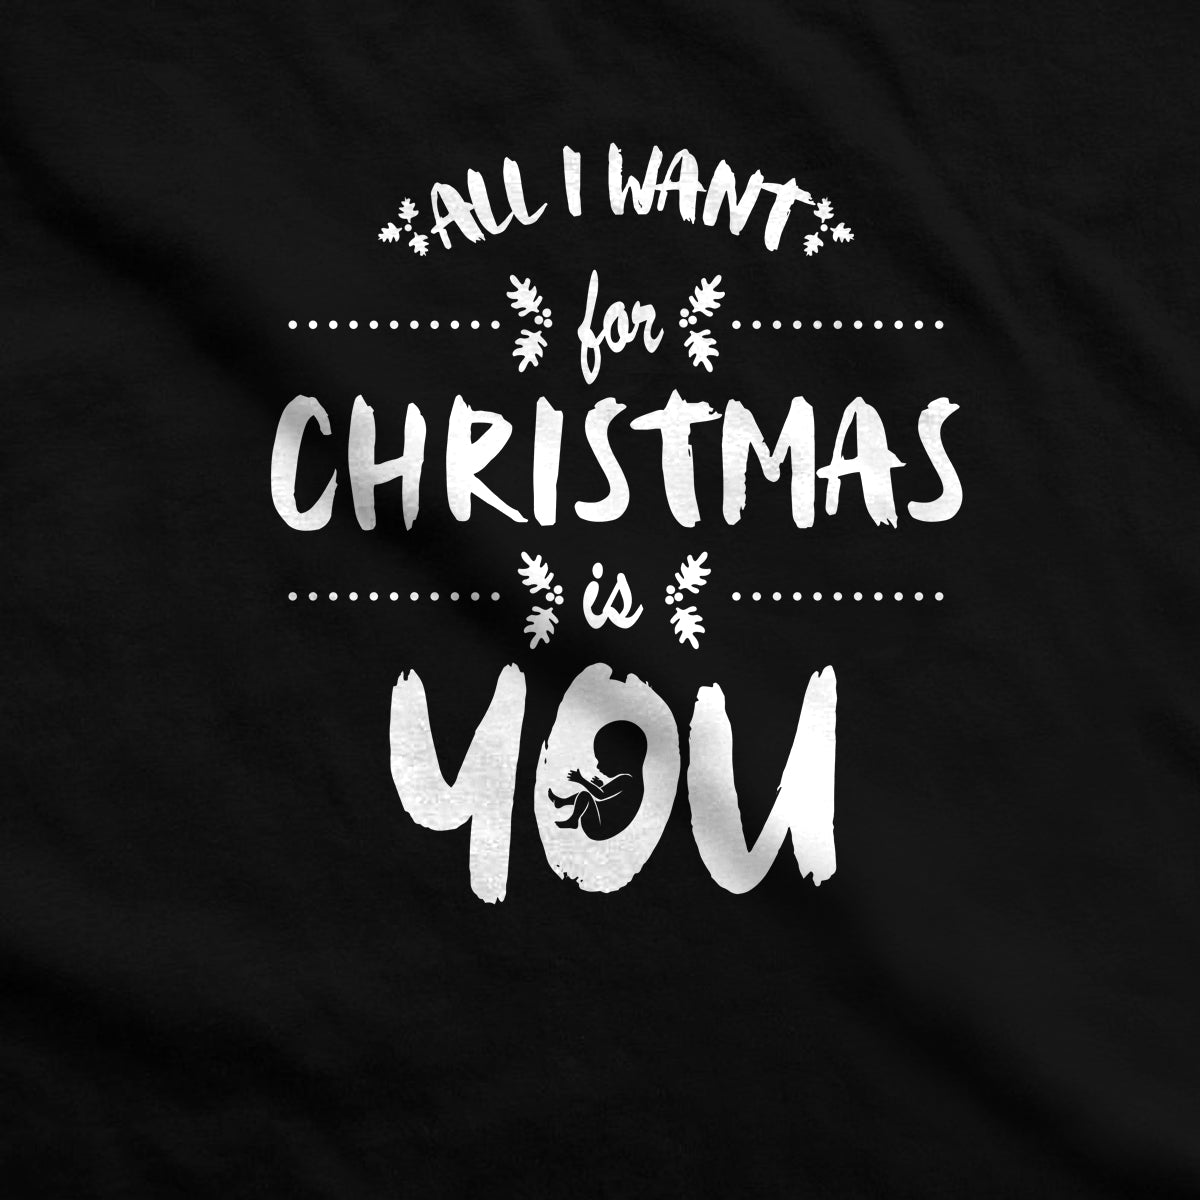 All I Want For Christmas is You Maternity T-Shirt